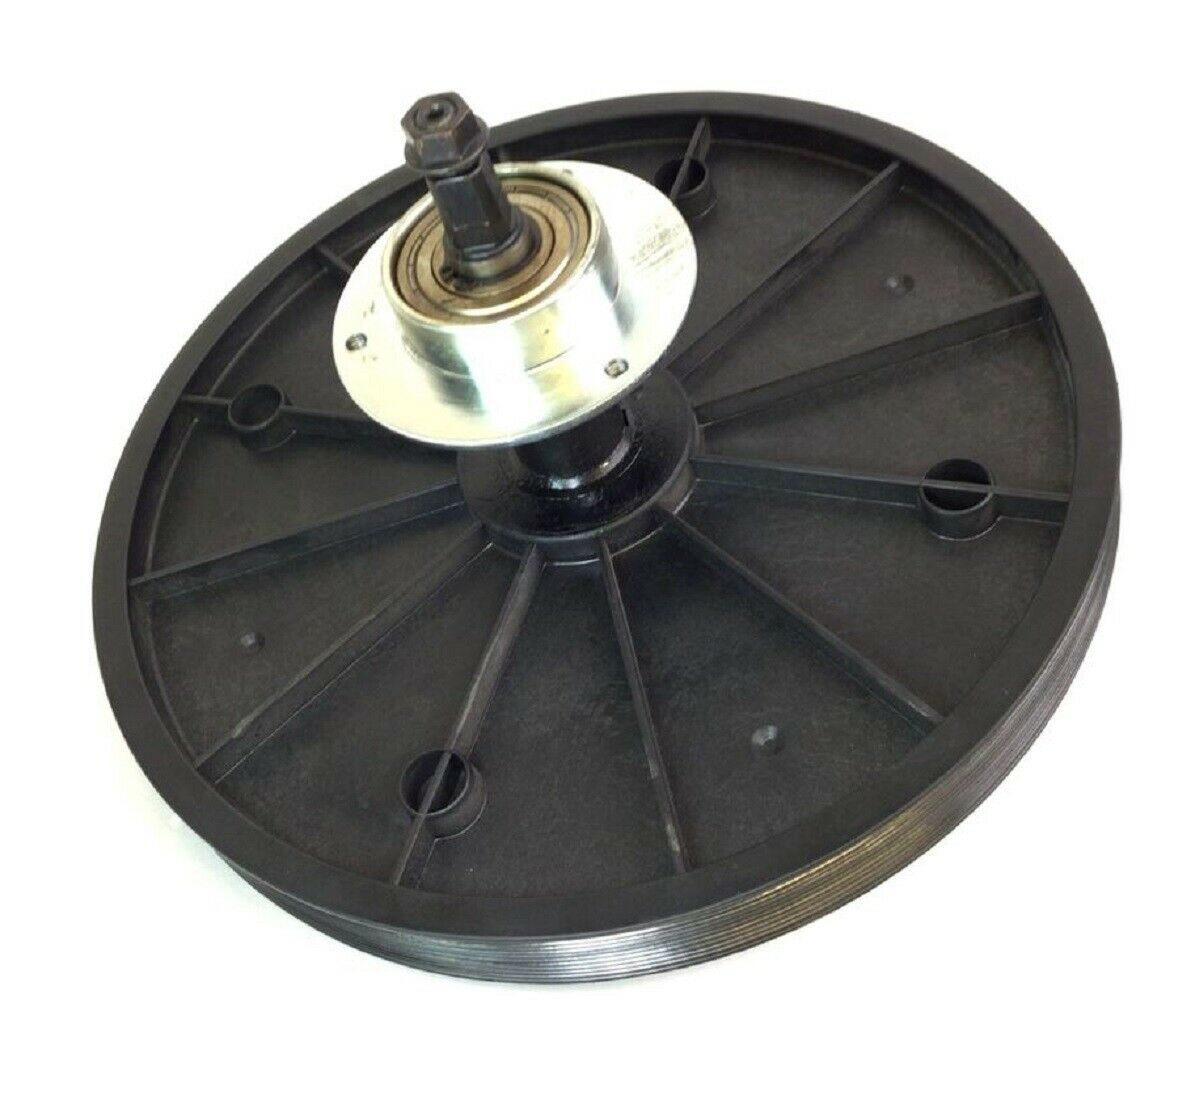 Vision Fitness X6000DA Elliptical Belt Pedal Axle Pulley Assembly 013059-Z